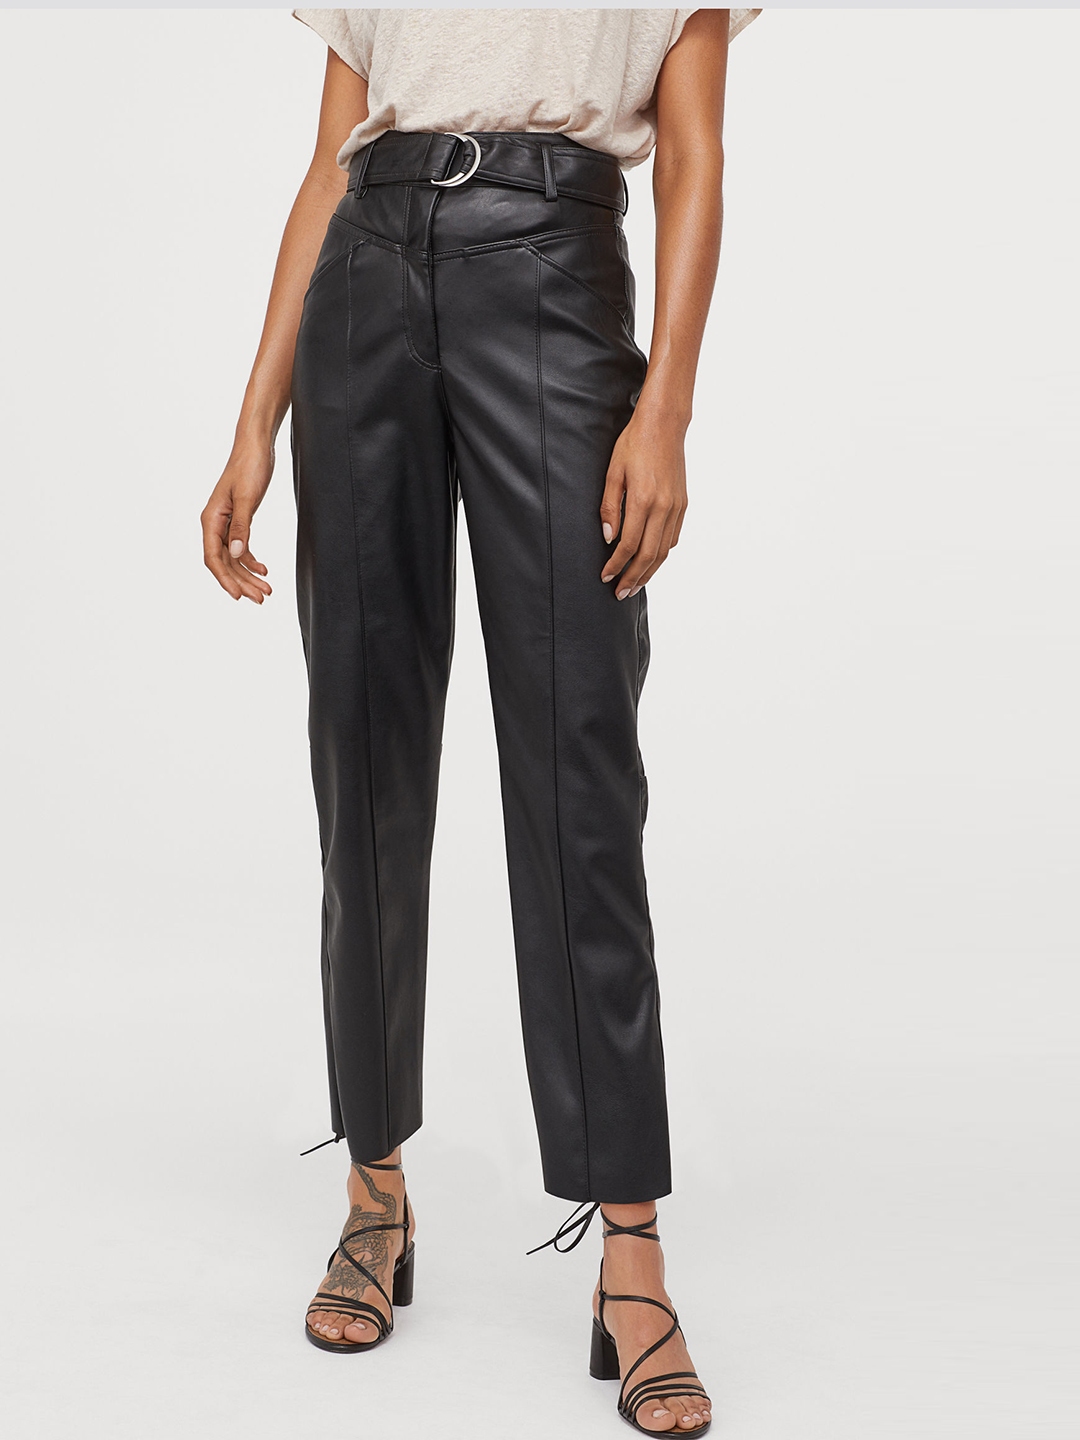 Buy H&M Women Black Solid Imitation Leather Trousers